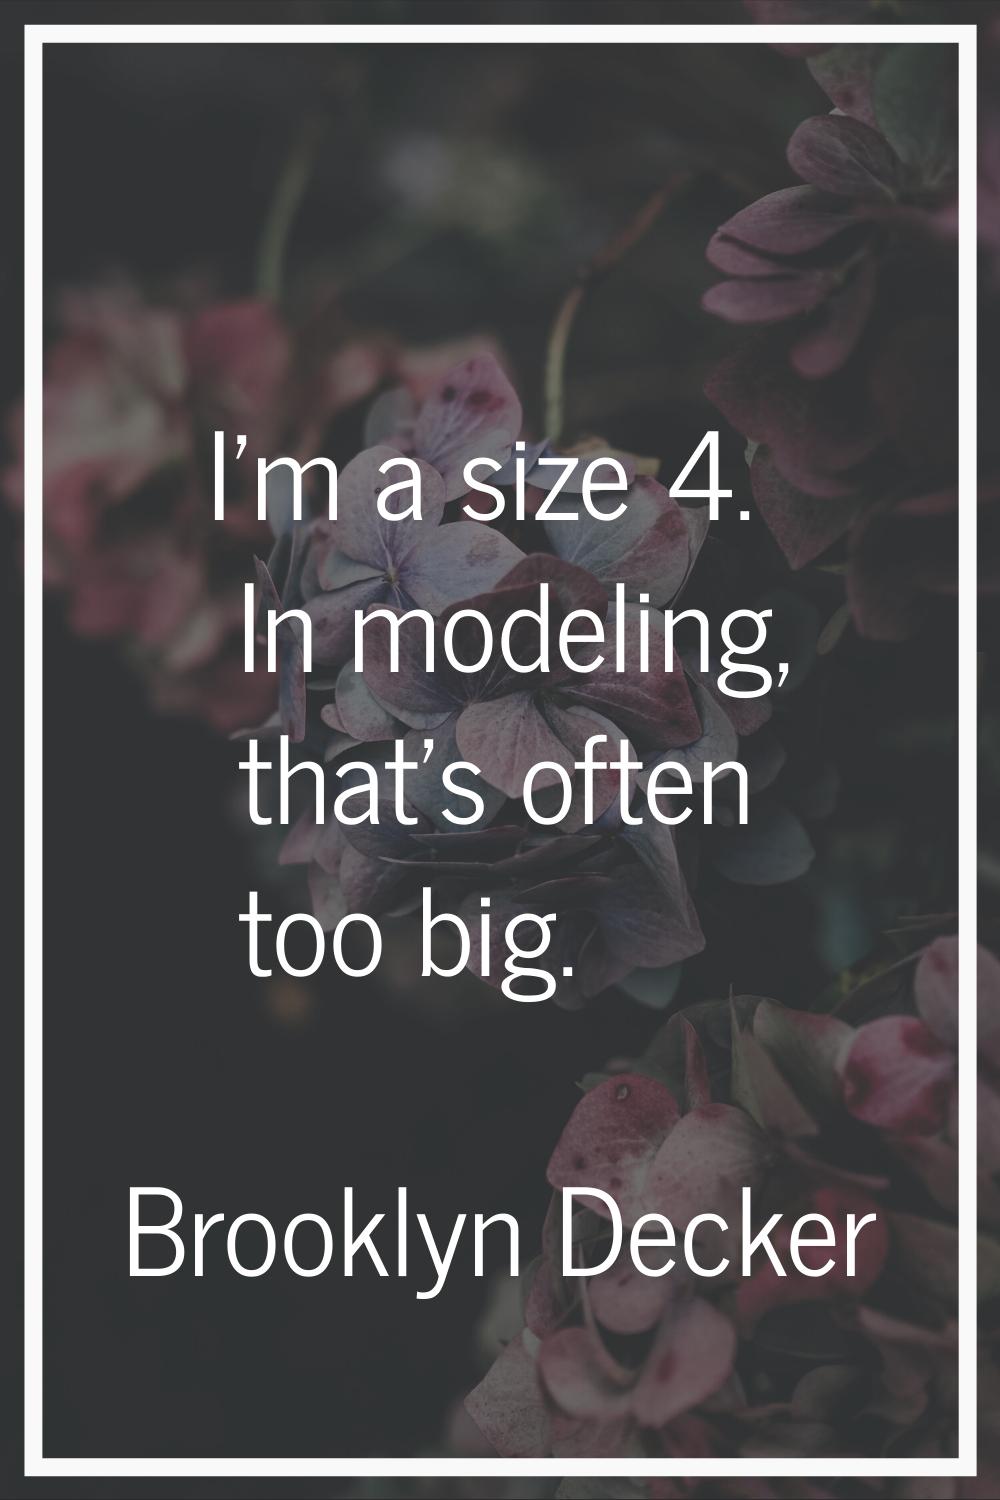 I'm a size 4. In modeling, that's often too big.